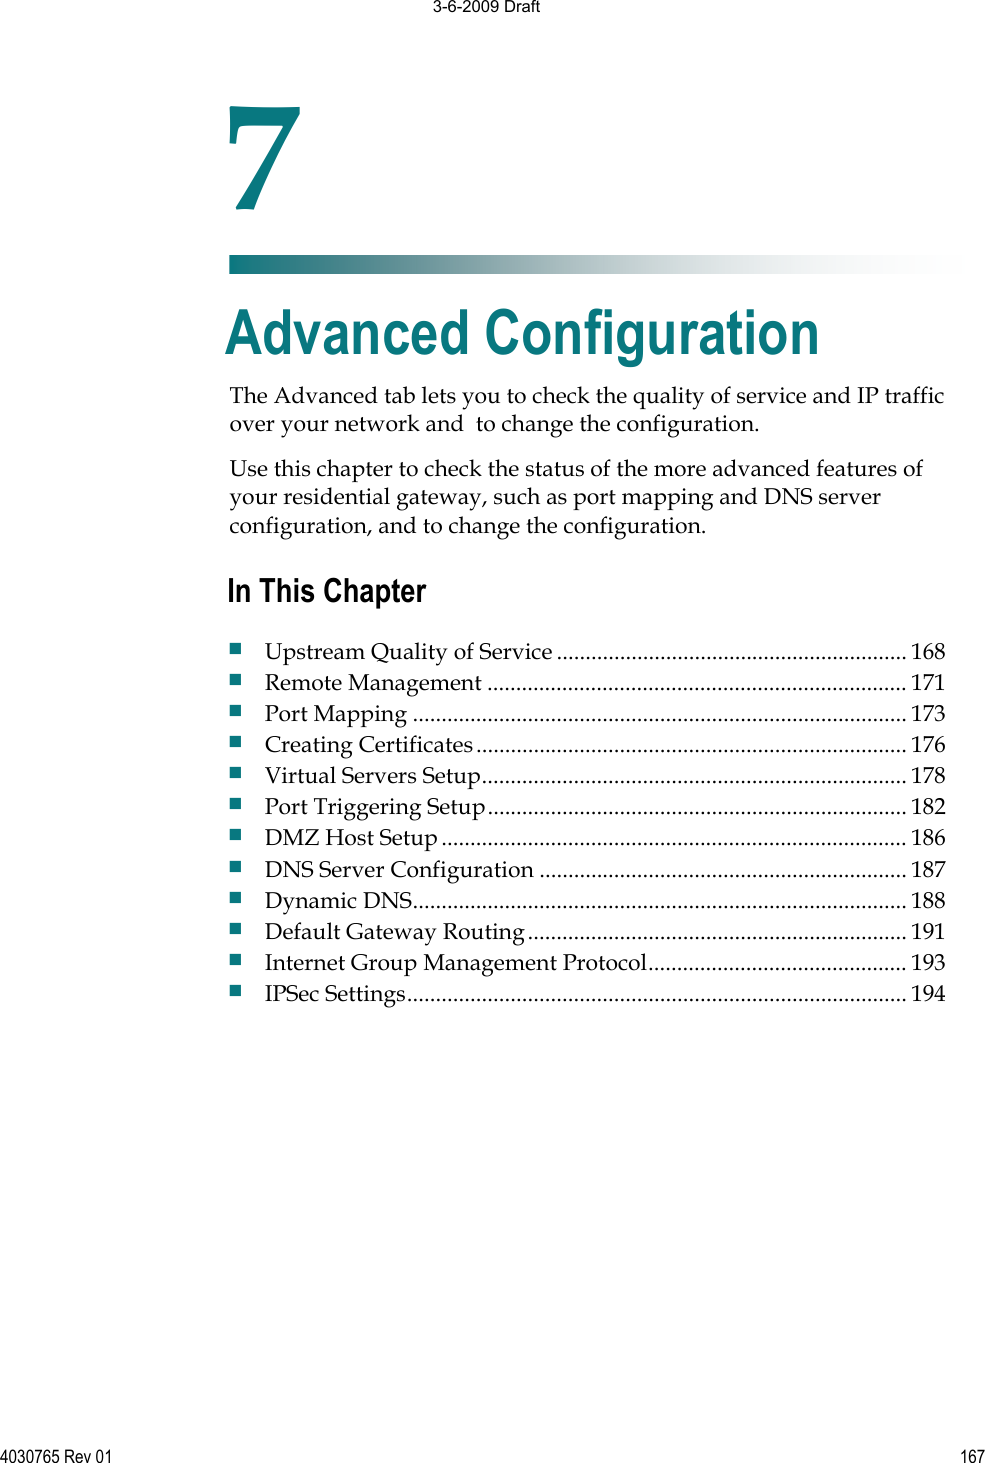 4030765 Rev 01 167The Advanced tab lets you to check the quality of service and IP traffic over your network and  to change the configuration. Use this chapter to check the status of the more advanced features of your residential gateway, such as port mapping and DNS server configuration, and to change the configuration. 7Chapter 7Advanced Configuration In This Chapter Upstream Quality of Service ............................................................. 168 Remote Management ......................................................................... 171 Port Mapping ...................................................................................... 173 Creating Certificates........................................................................... 176 Virtual Servers Setup.......................................................................... 178 Port Triggering Setup......................................................................... 182 DMZ Host Setup................................................................................. 186 DNS Server Configuration ................................................................ 187 Dynamic DNS...................................................................................... 188 Default Gateway Routing.................................................................. 191 Internet Group Management Protocol............................................. 193 IPSec Settings....................................................................................... 194 3-6-2009 Draft